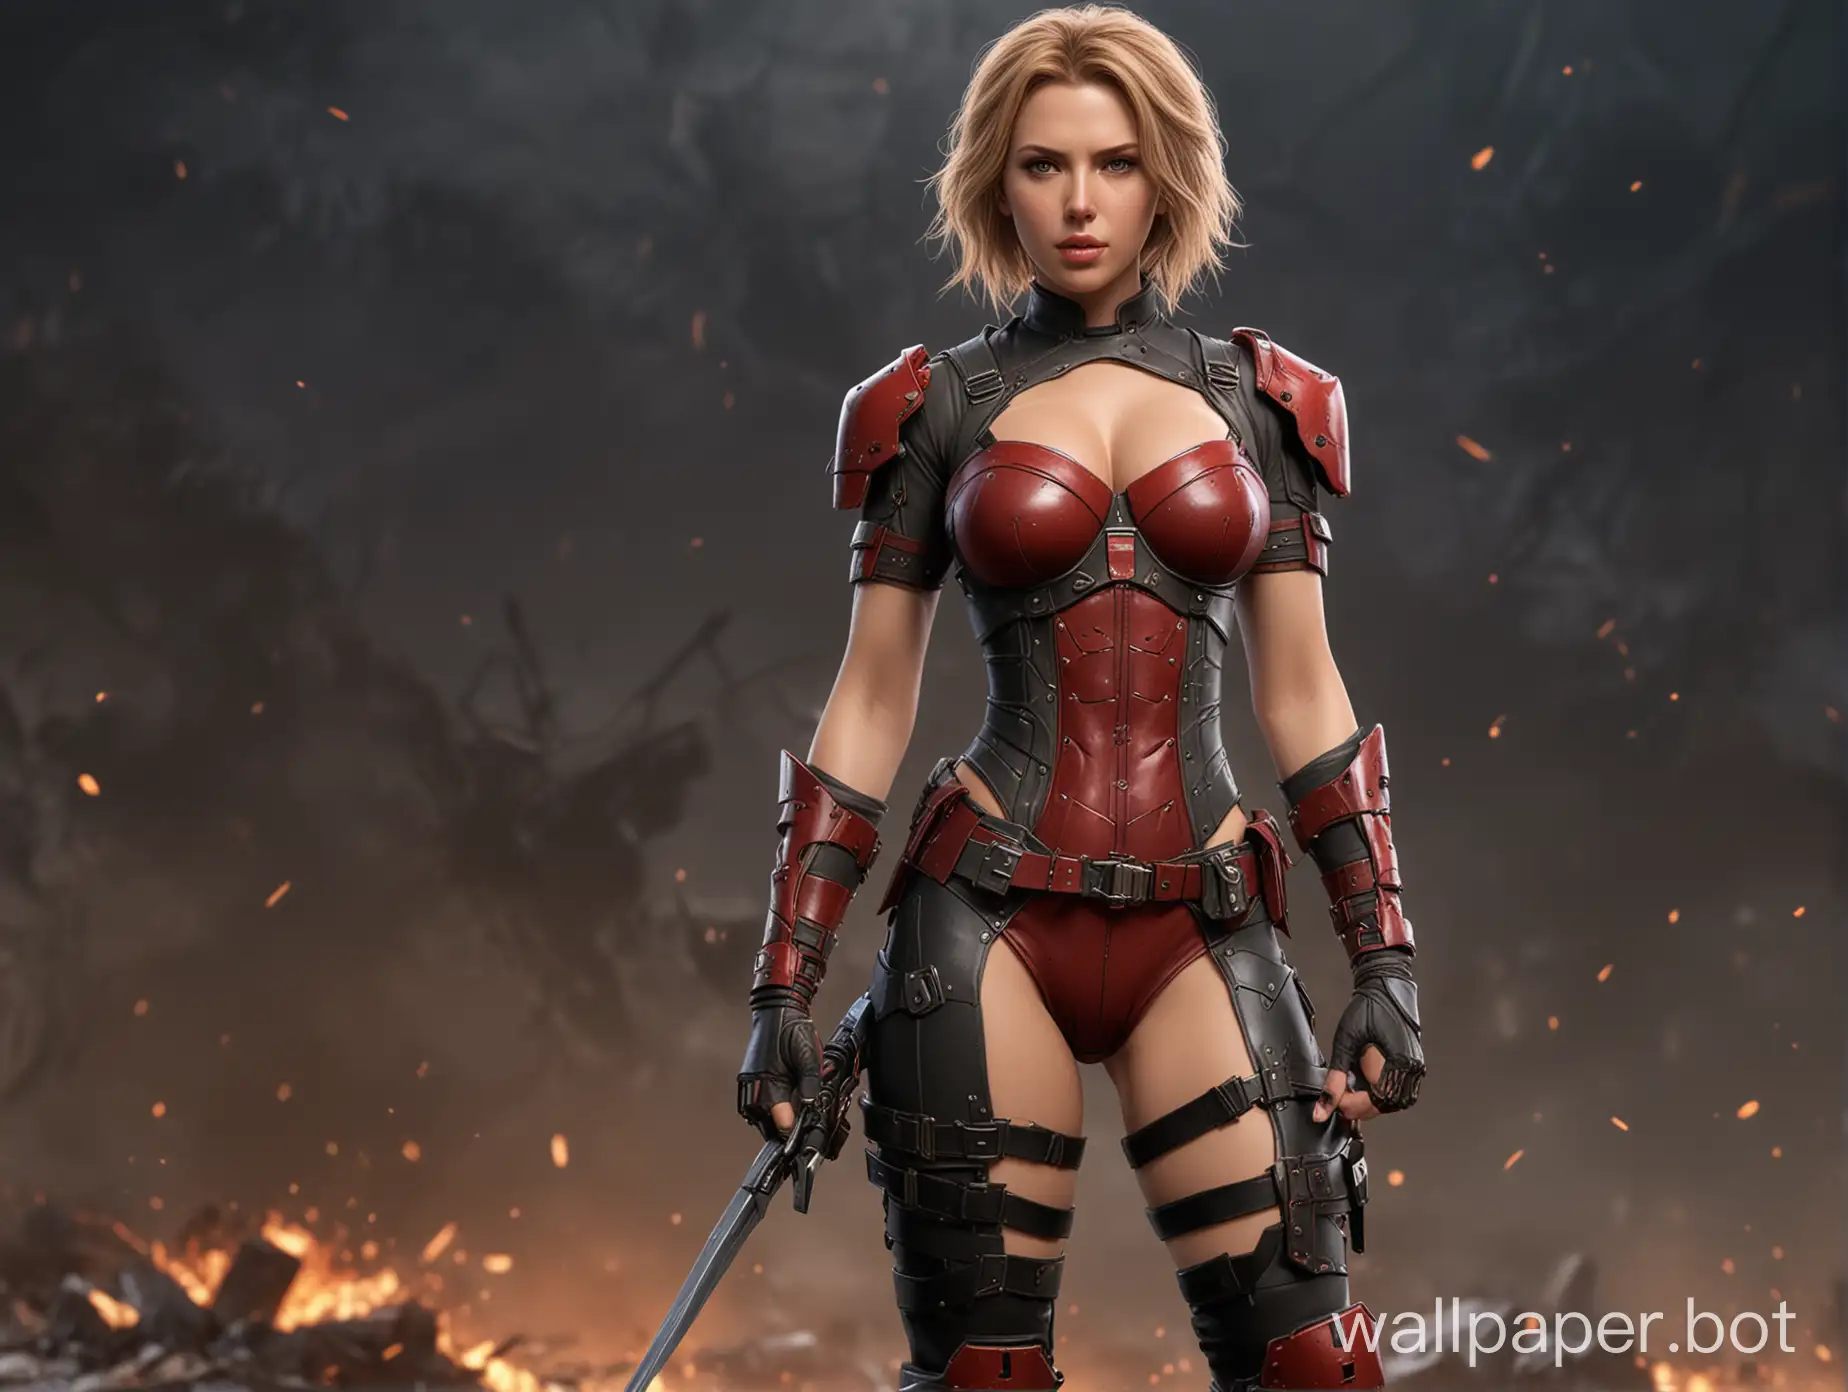 Scarlet-Johansson-Sexy-Warrior-in-Limited-Clothing-with-Warzone-Background-3D-Anime-Style